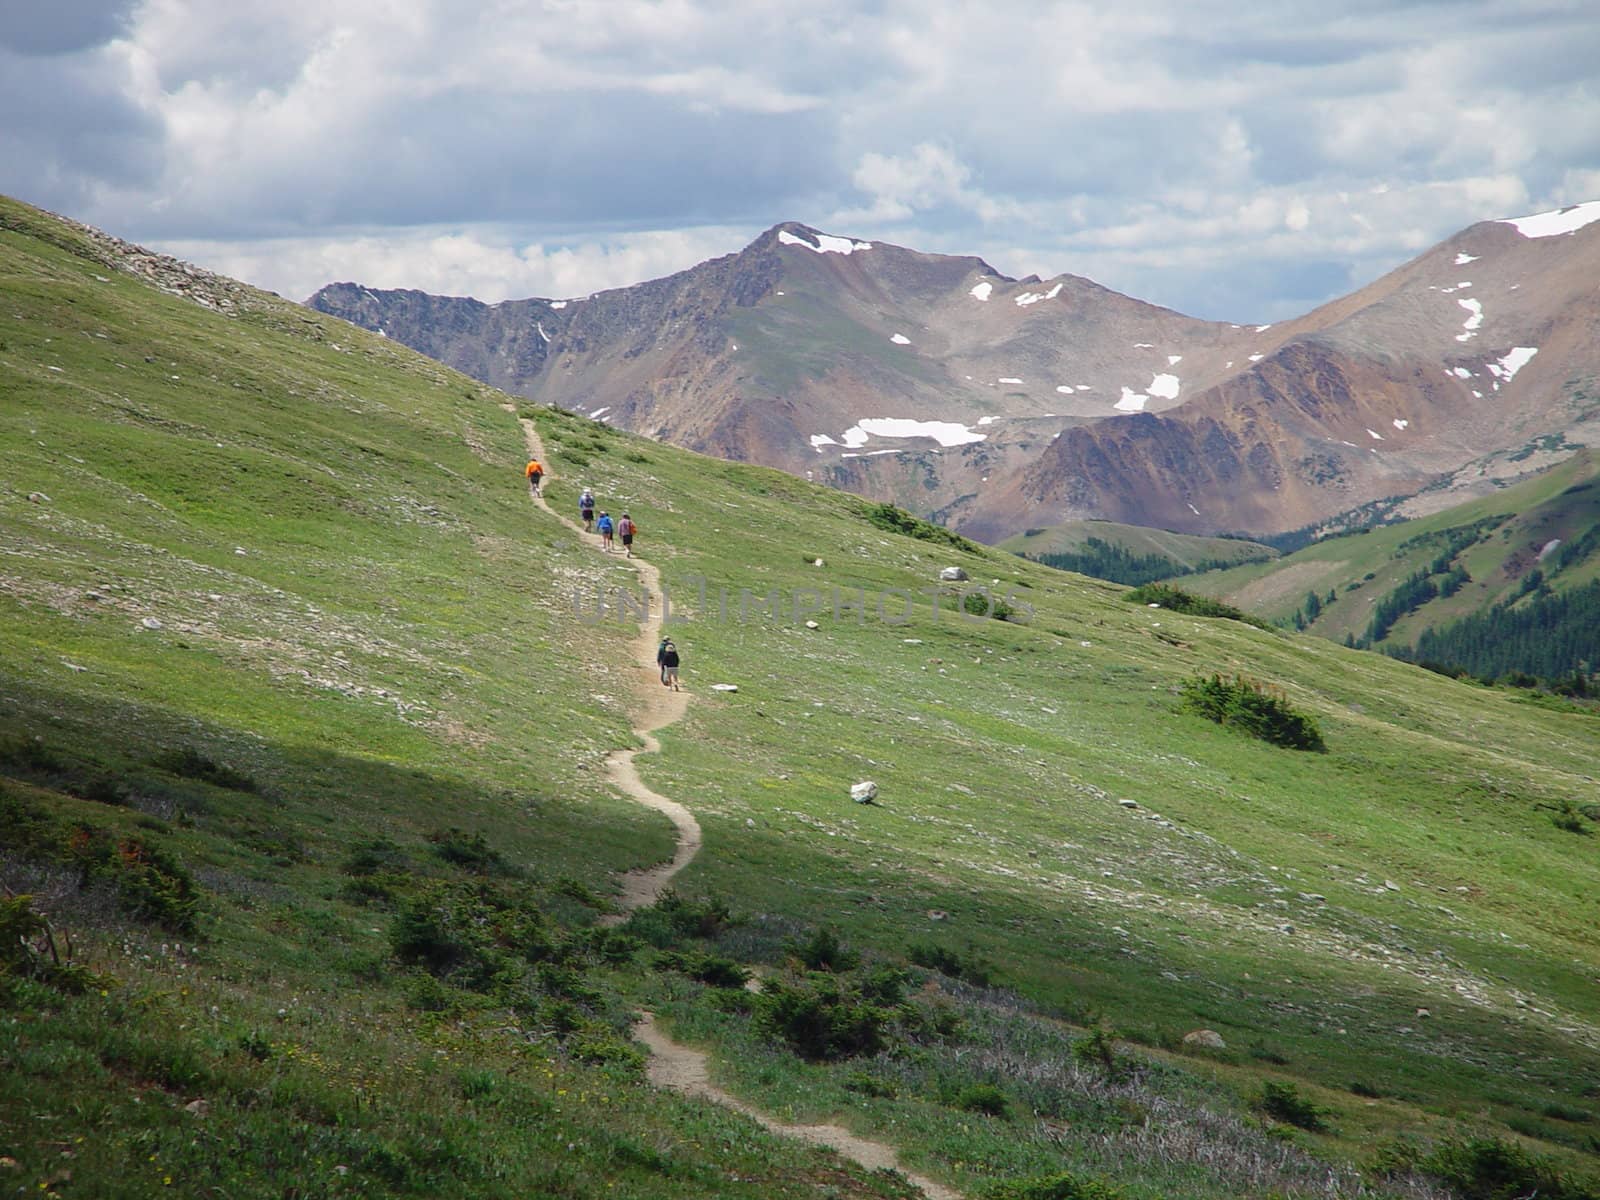 A group of hikers sets out into Colorado’s high country.